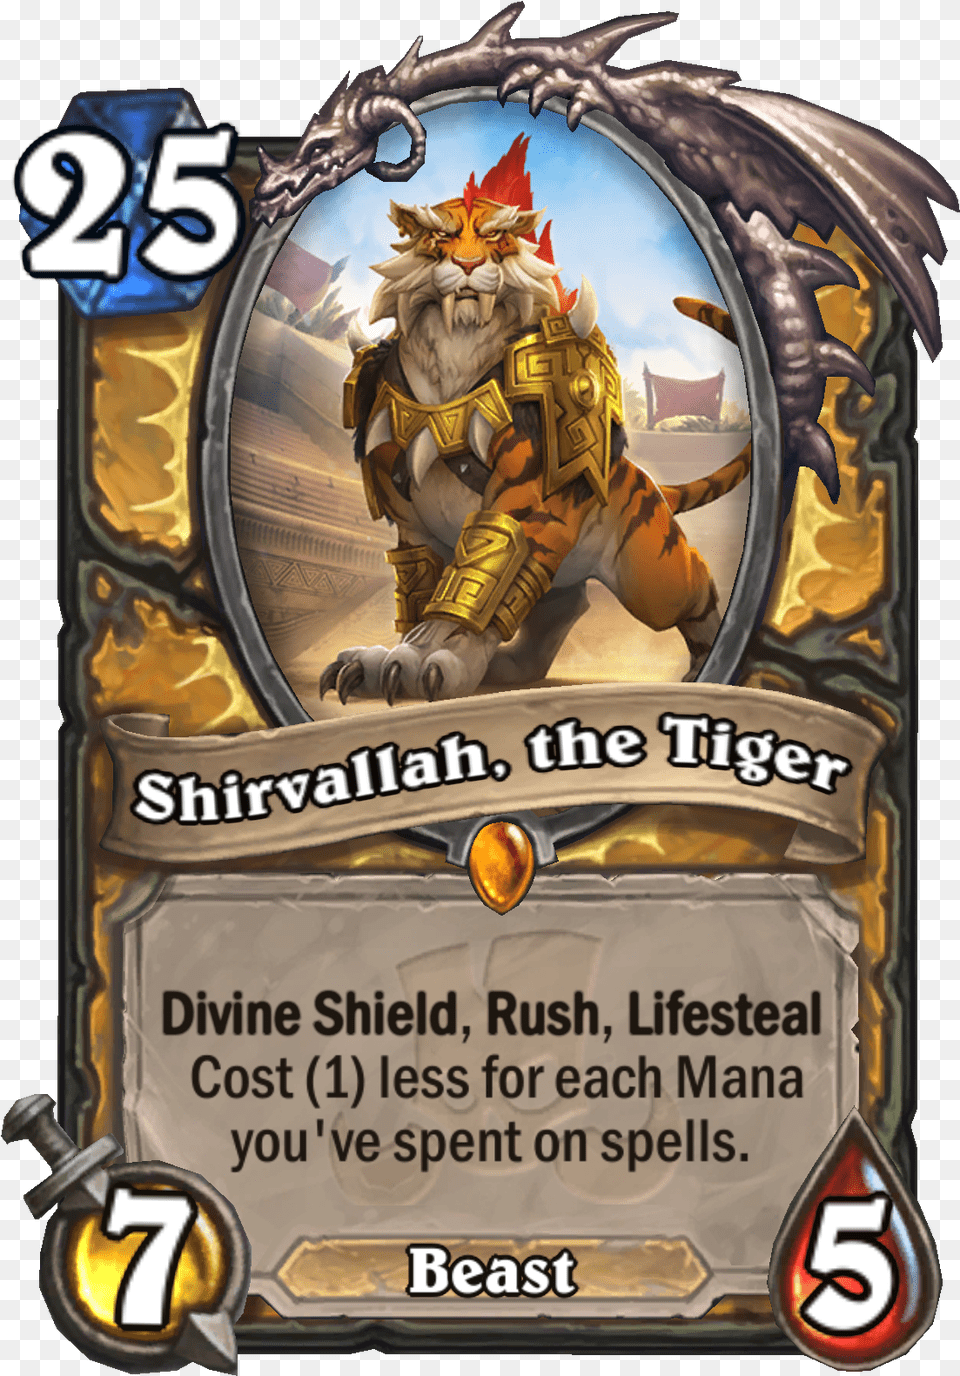 Shirvallahthetiger Enus Boomsday Project Release Date, Animal, Dinosaur, Reptile, Book Free Png Download